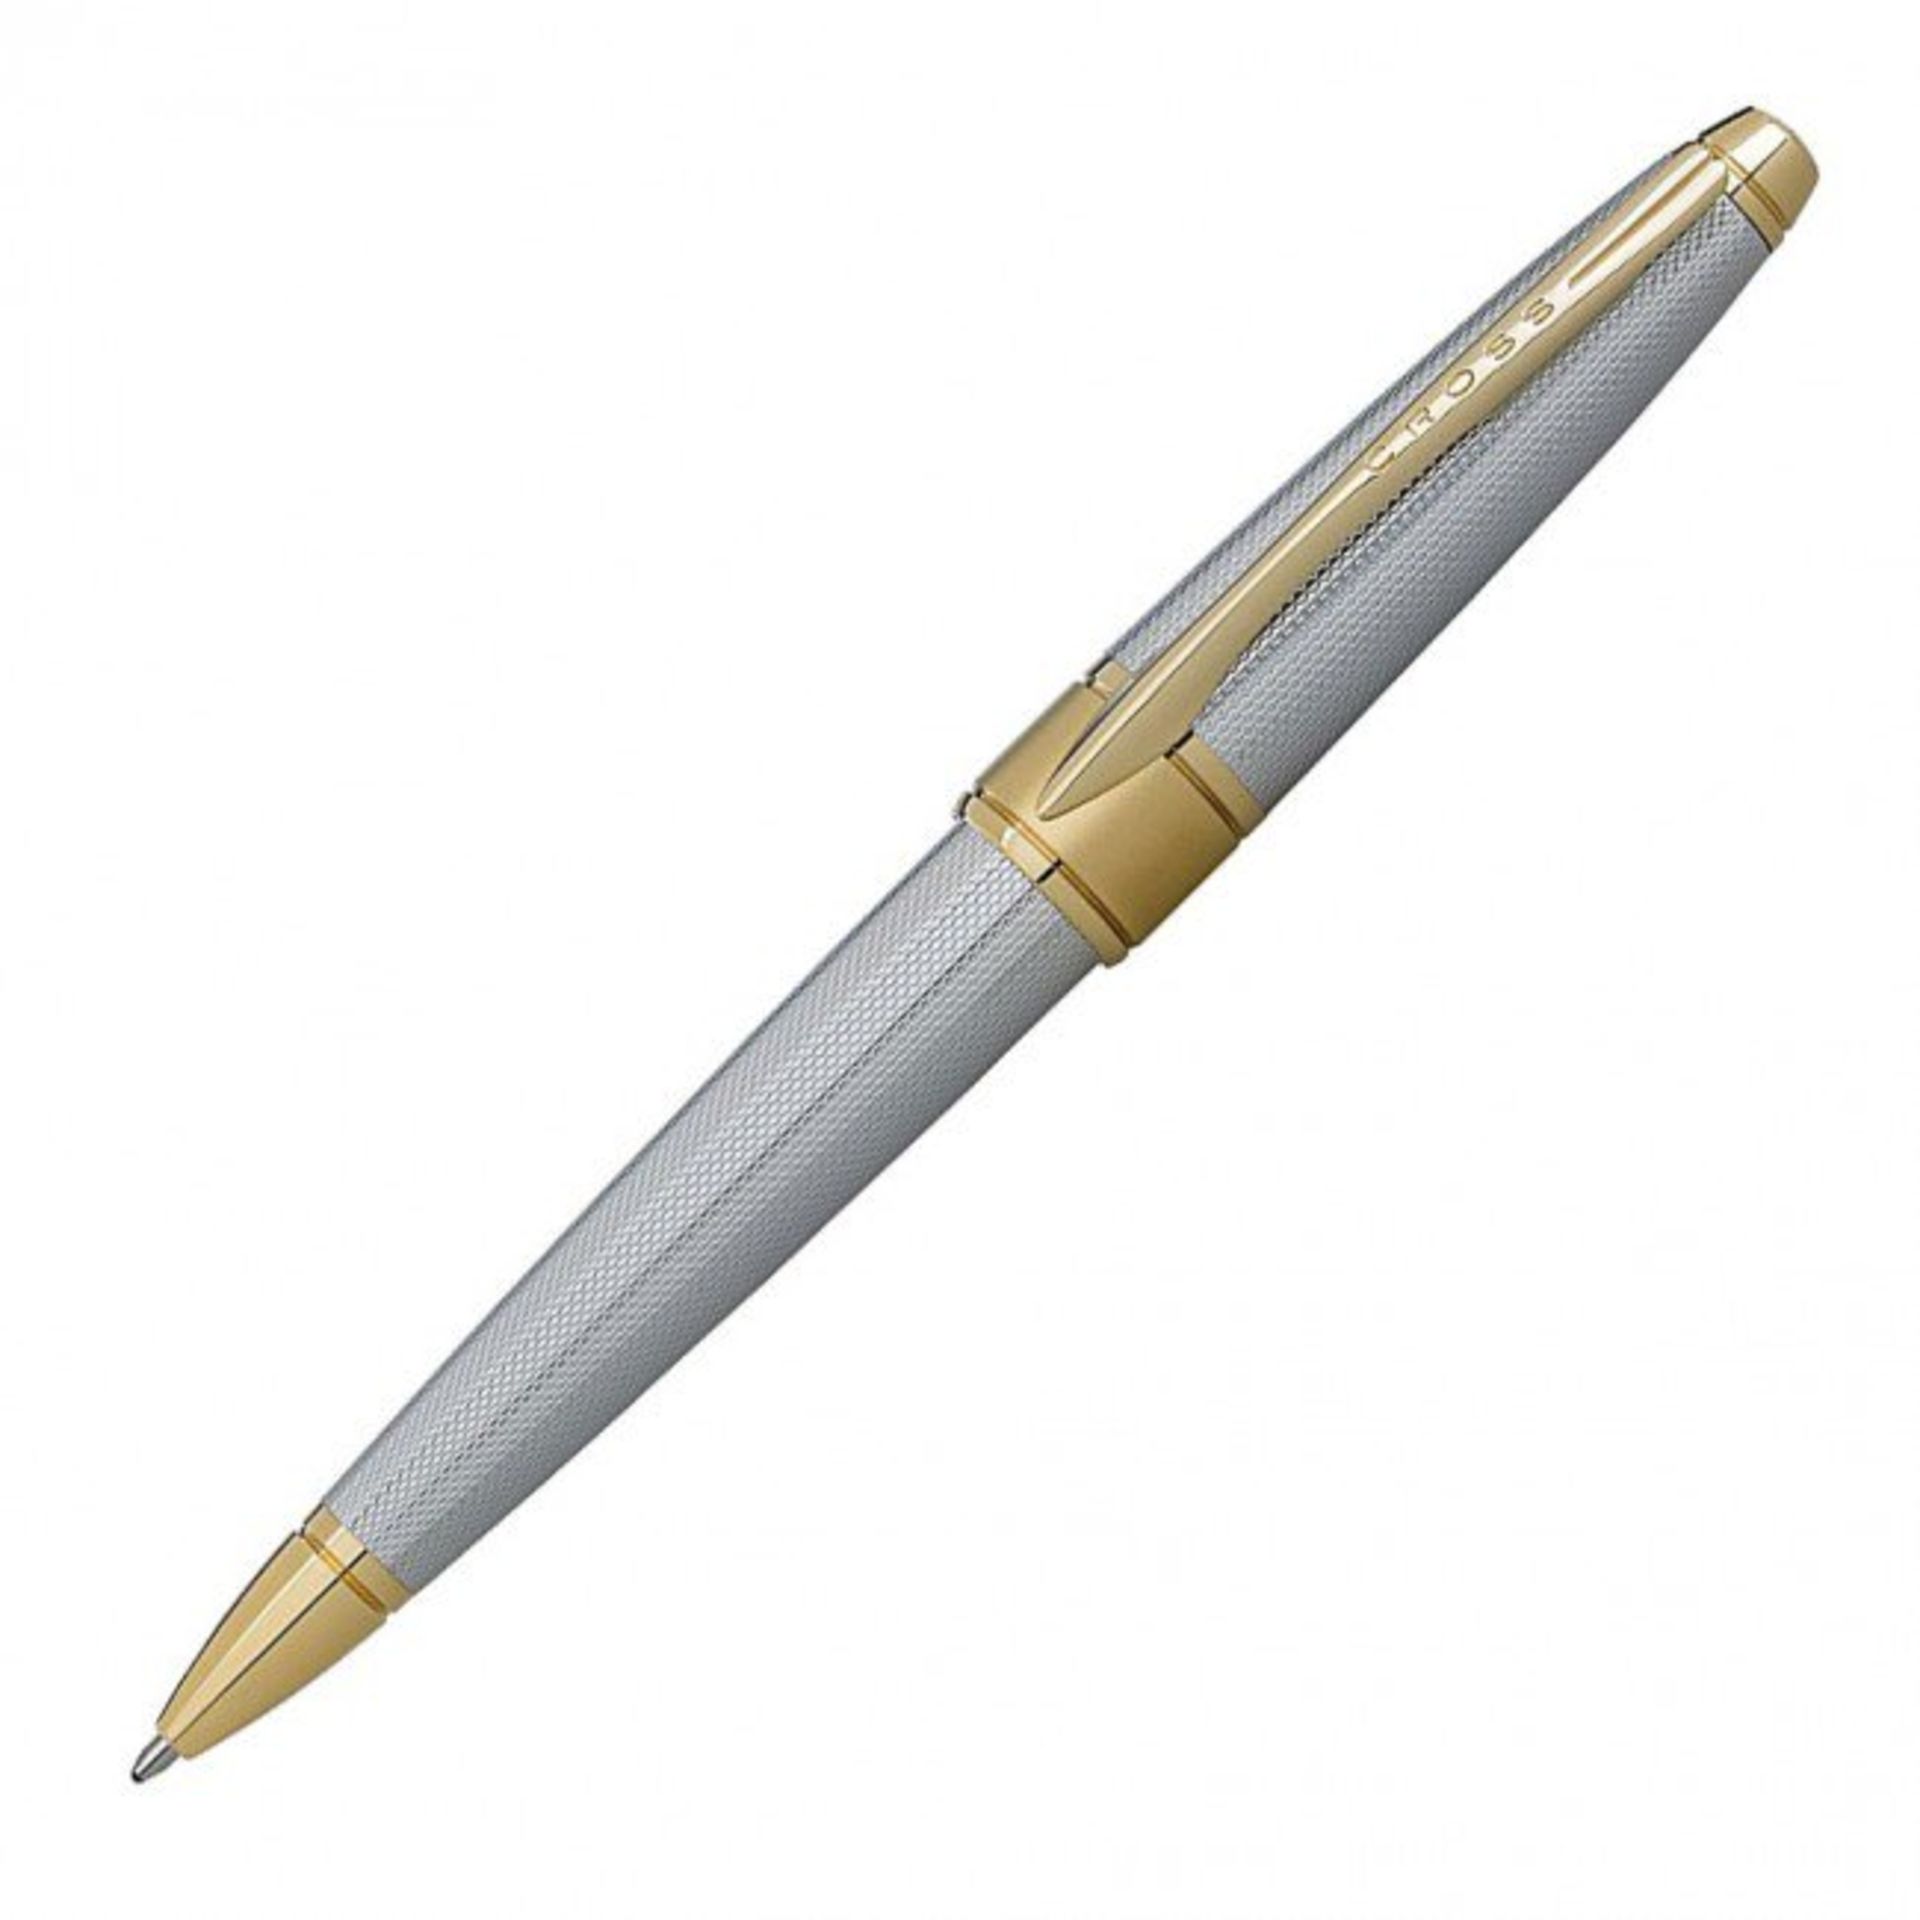 + VAT Brand New Cross Apogee Ballpoint Pen Chrome And Gold Plate In Luxury Gift Box RRP£115.00